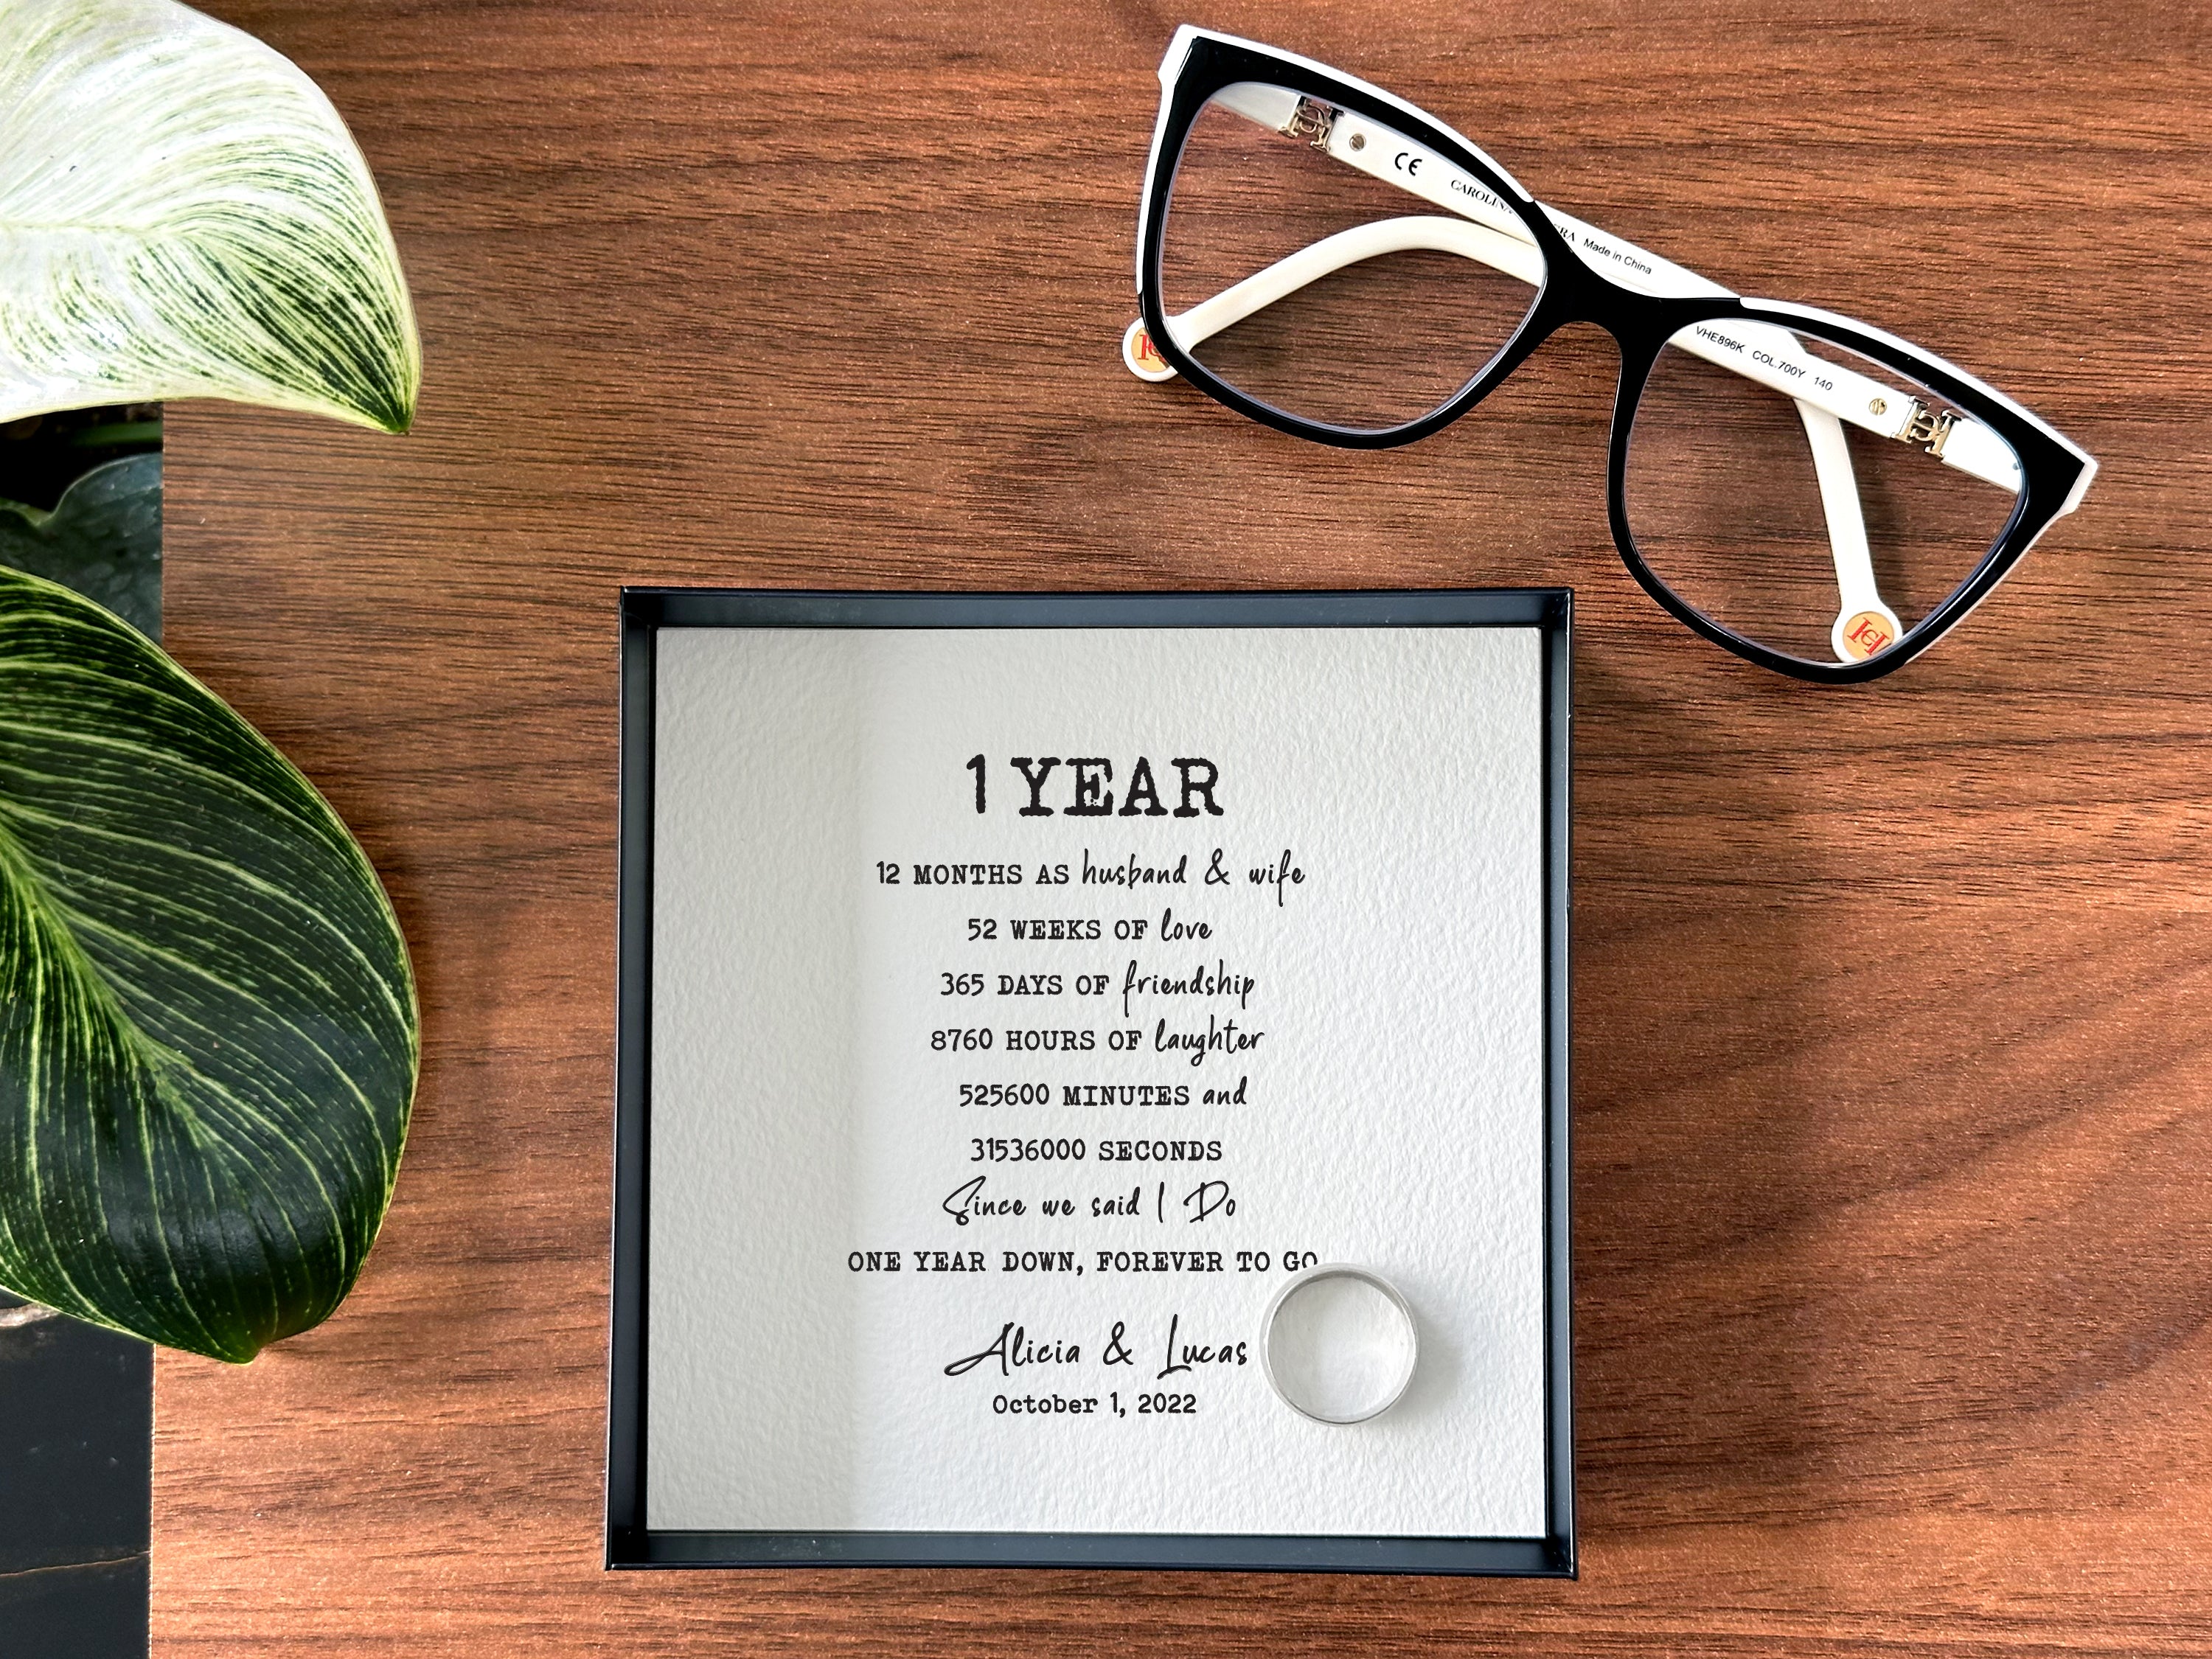 Paper catchall tray for her - first year anniversary gift